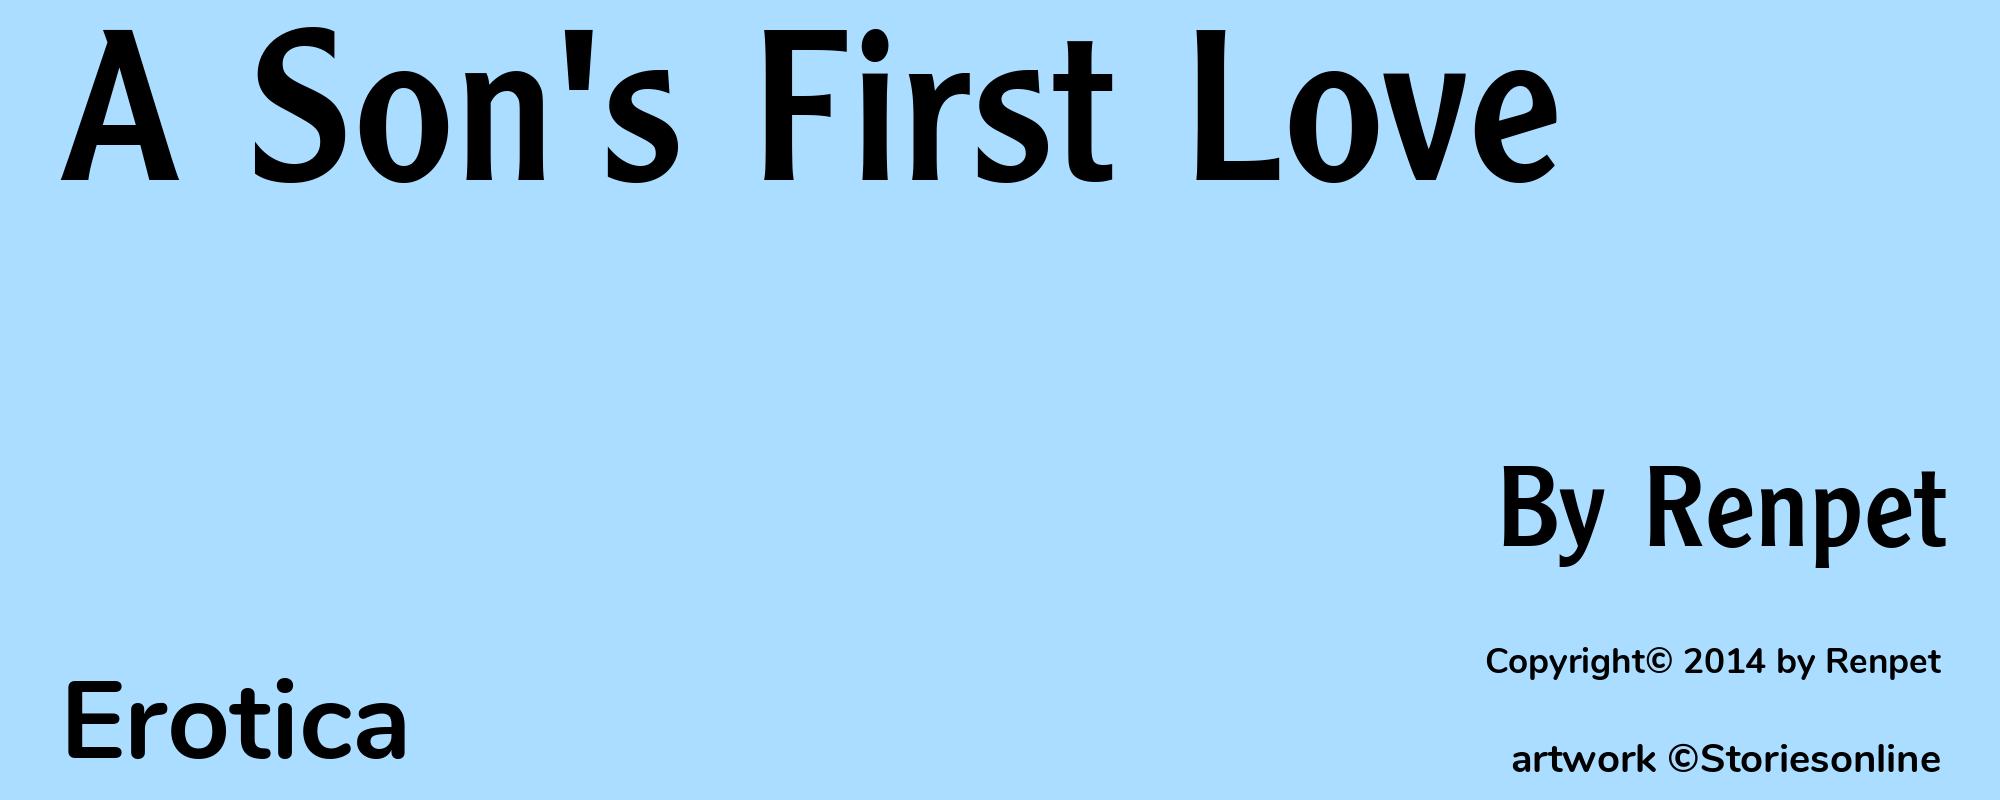 A Son's First Love - Cover